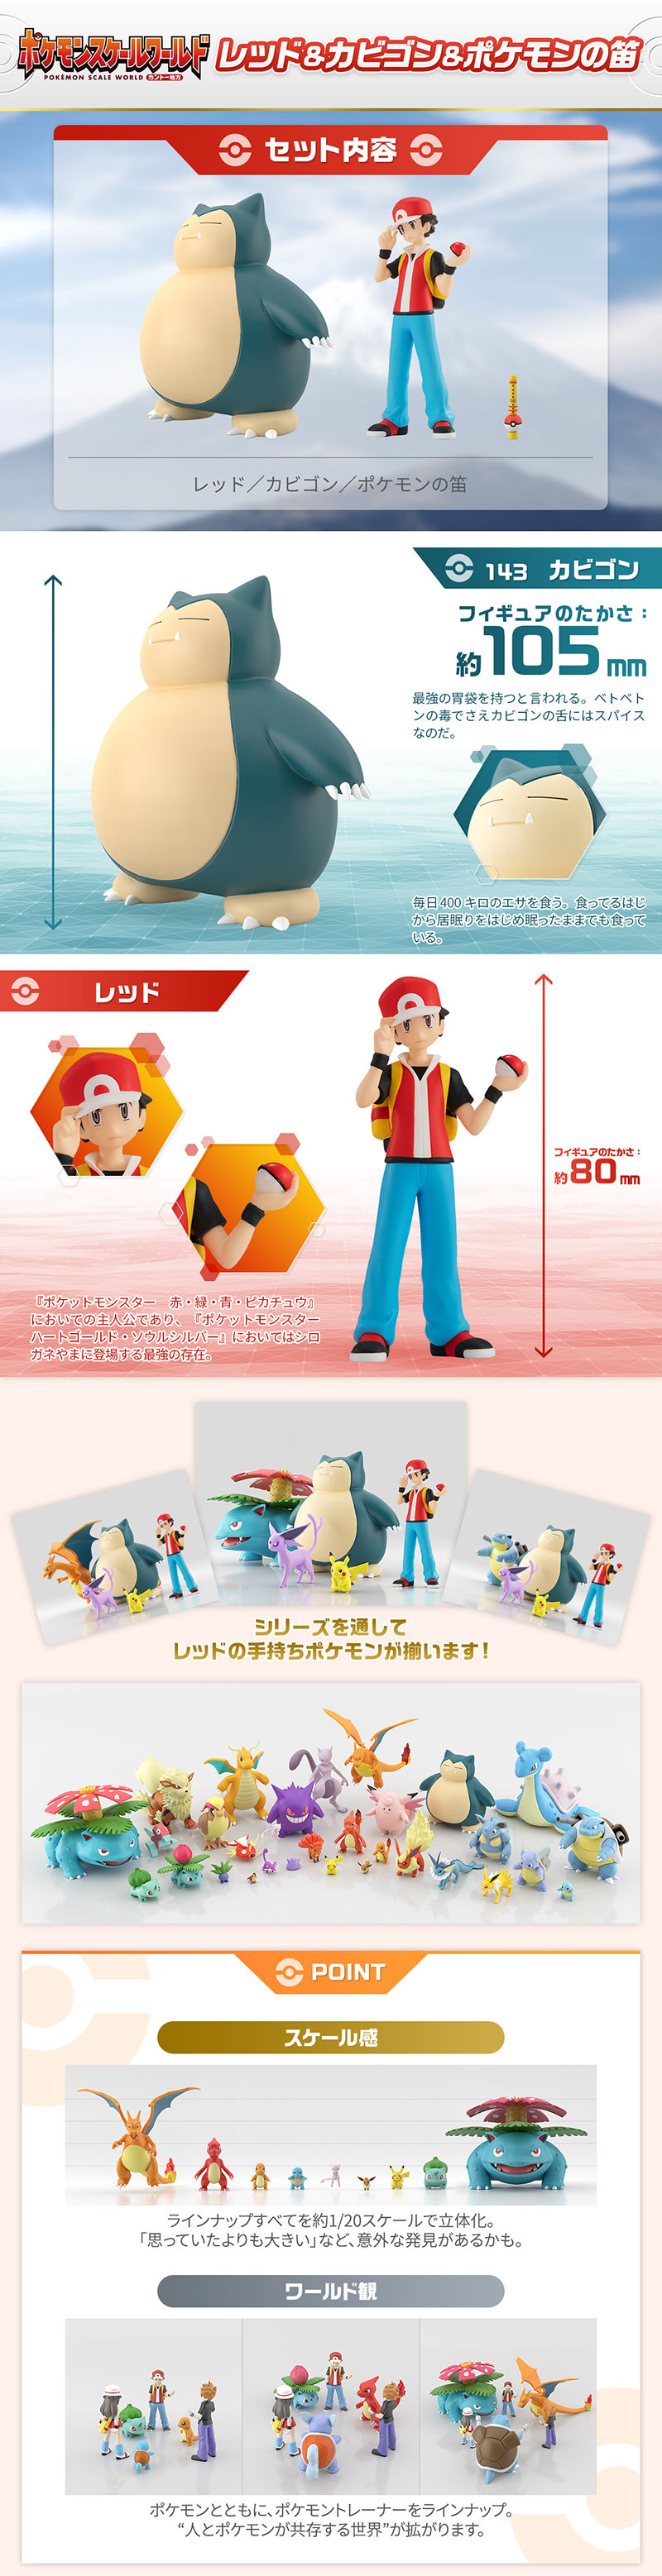 Pokemon Scale World Kanto Red Snorlax Pokemon Flute May 21 Delivery Pokemon Premium Bandai Singapore Online Store For Action Figures Model Kits Toys And More